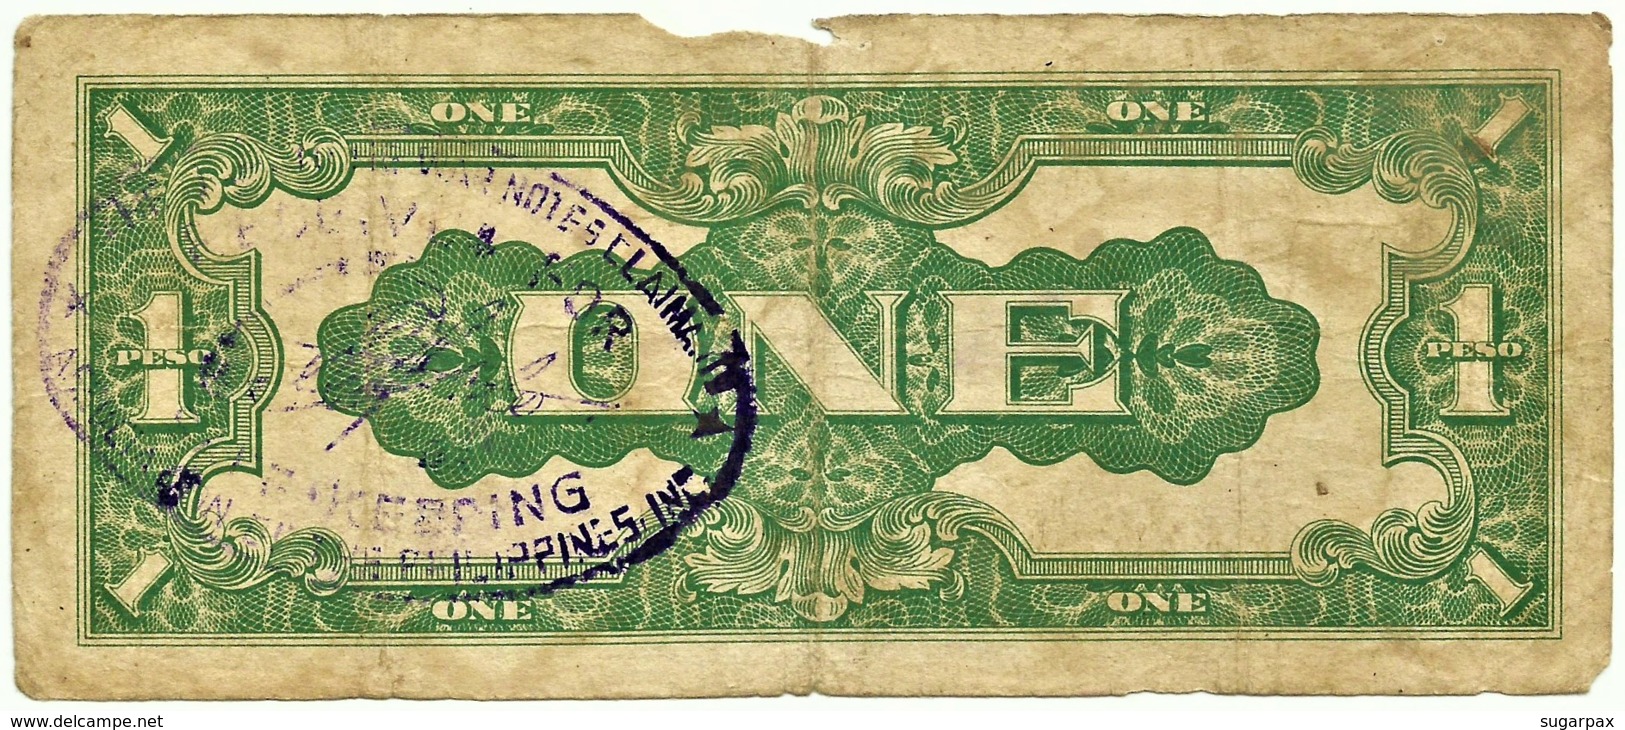 PHILIPPINES - 1 Peso - ND ( 1942 ) WWII - Pick 106.b - With OVERPRINT - Serie PH - Japanese Occupation - Philippines